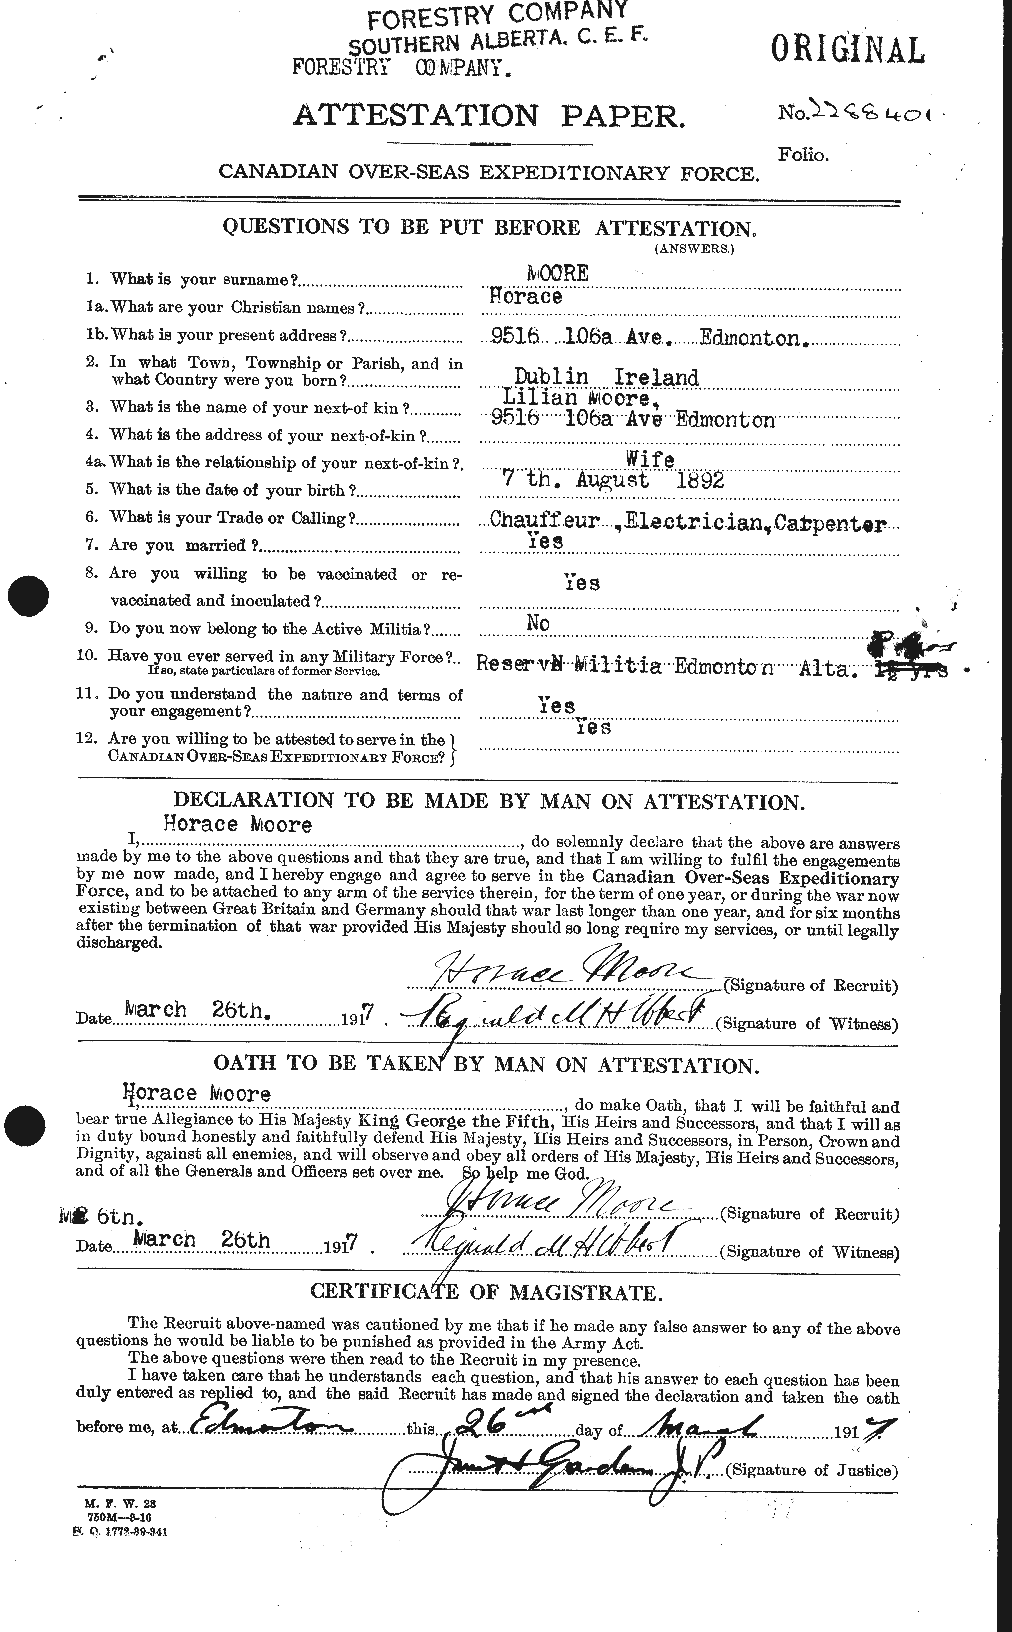 Personnel Records of the First World War - CEF 502134a